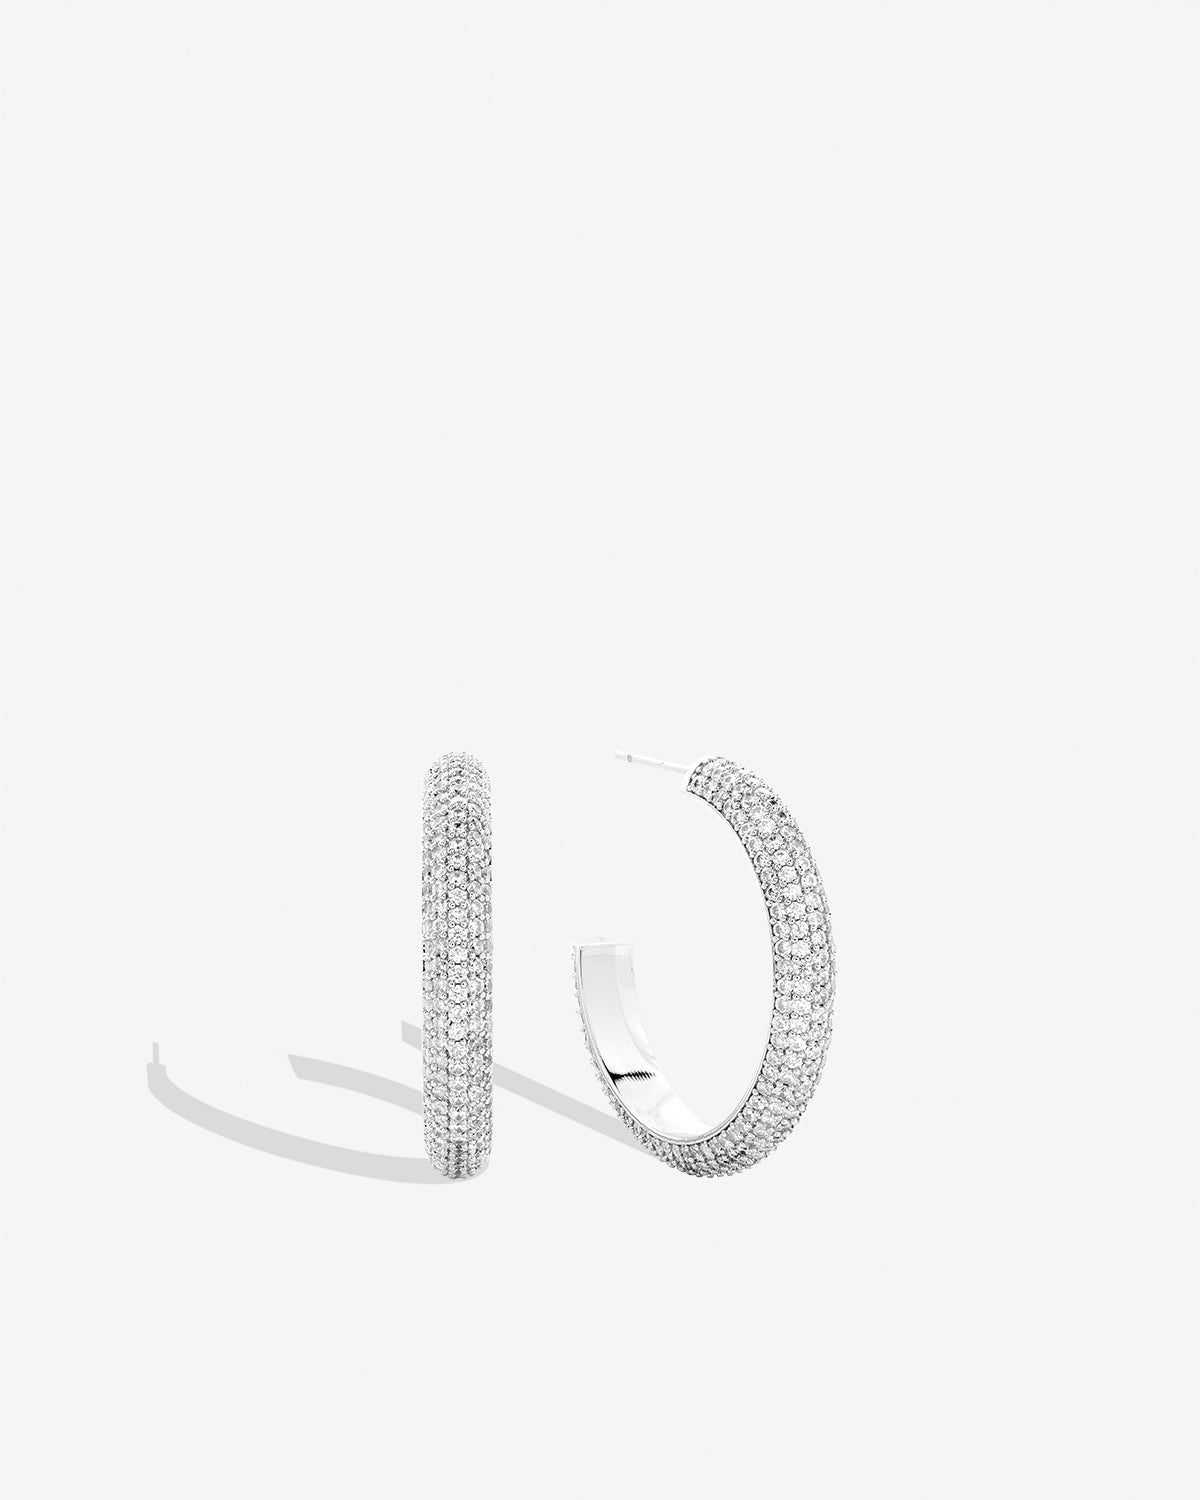 Bryan Anthonys Unstoppable Pave Midi Hoops Silver